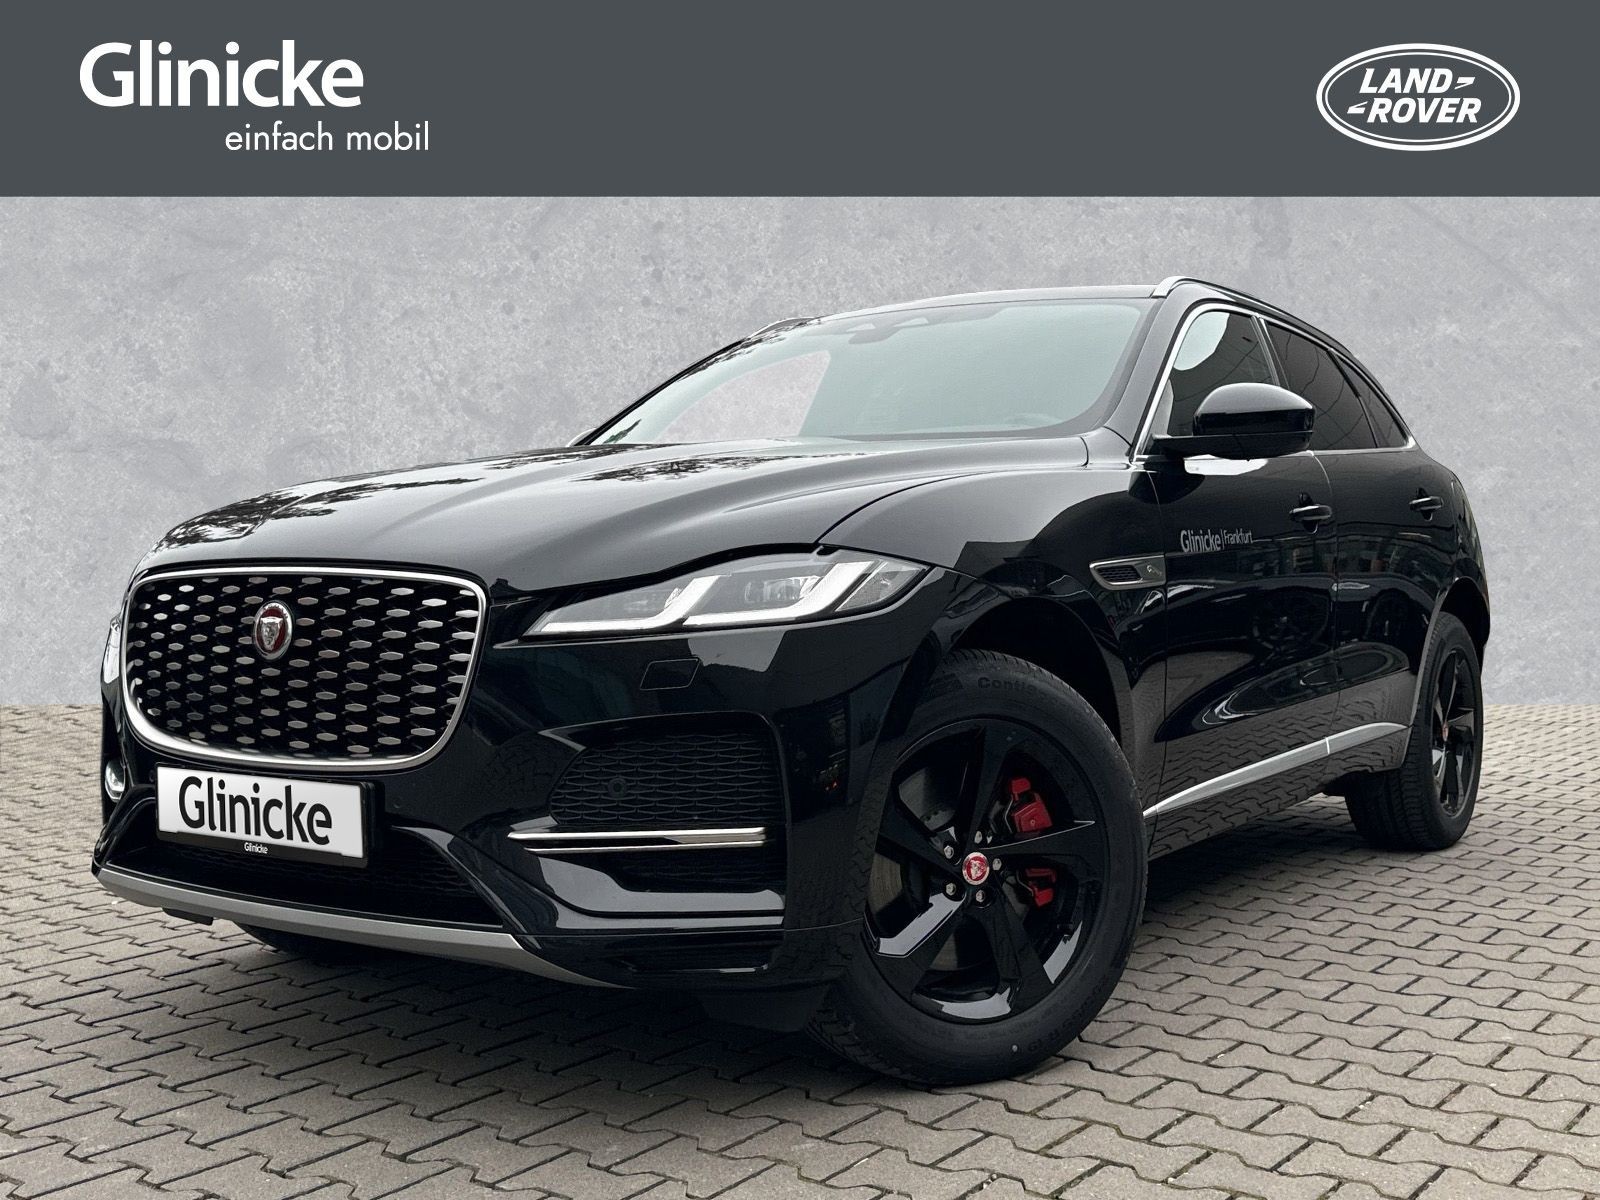 F-PACE P400e S AWD Totewinkel, 19", Induktion